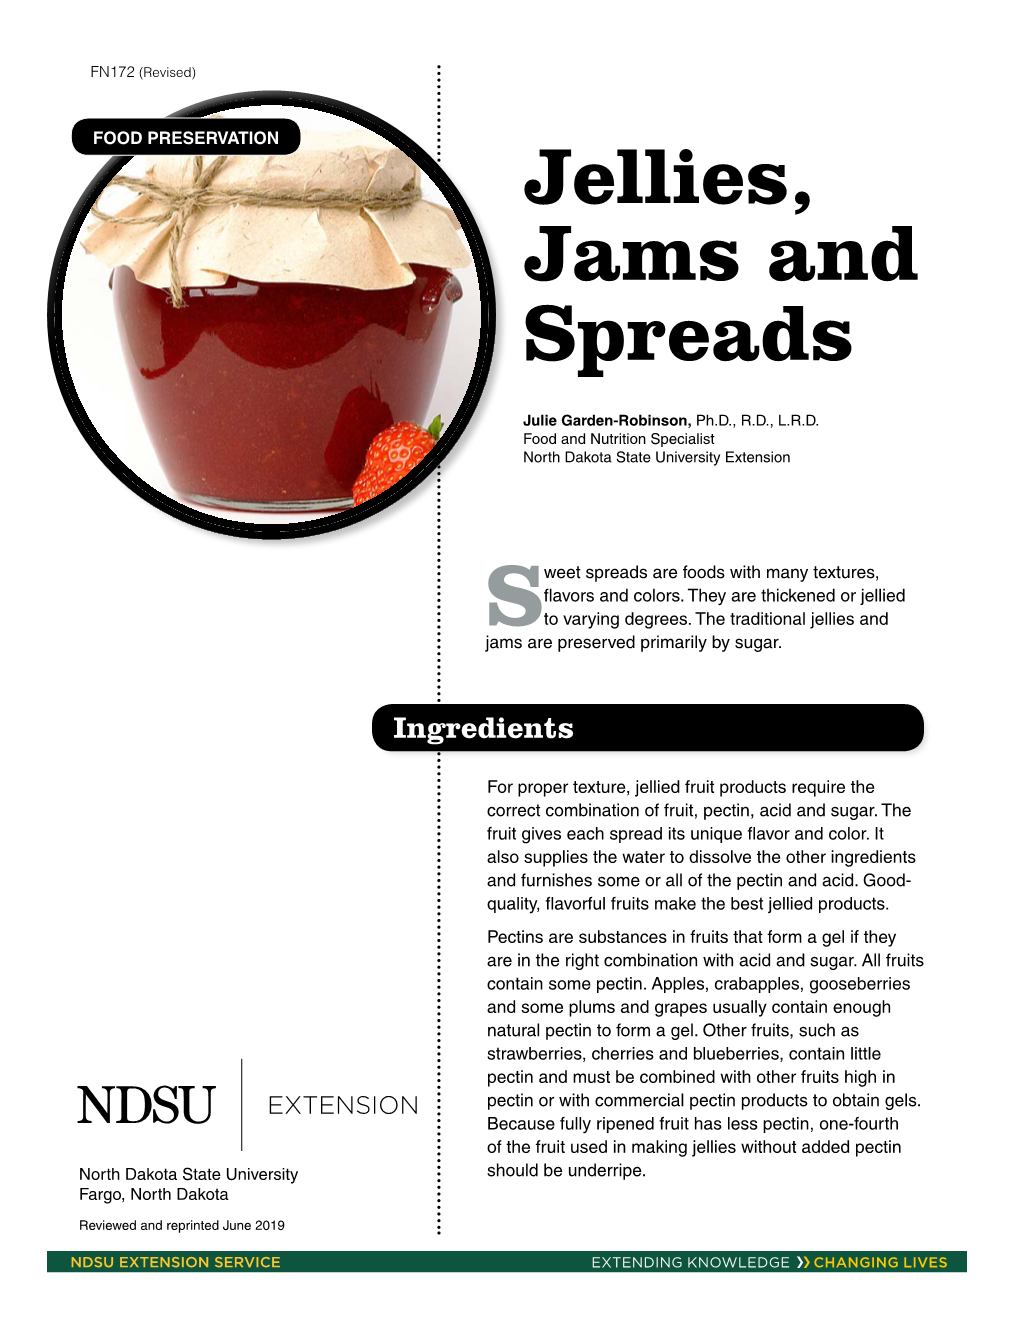 Food Preservation: Jellies, Jams and Spreads